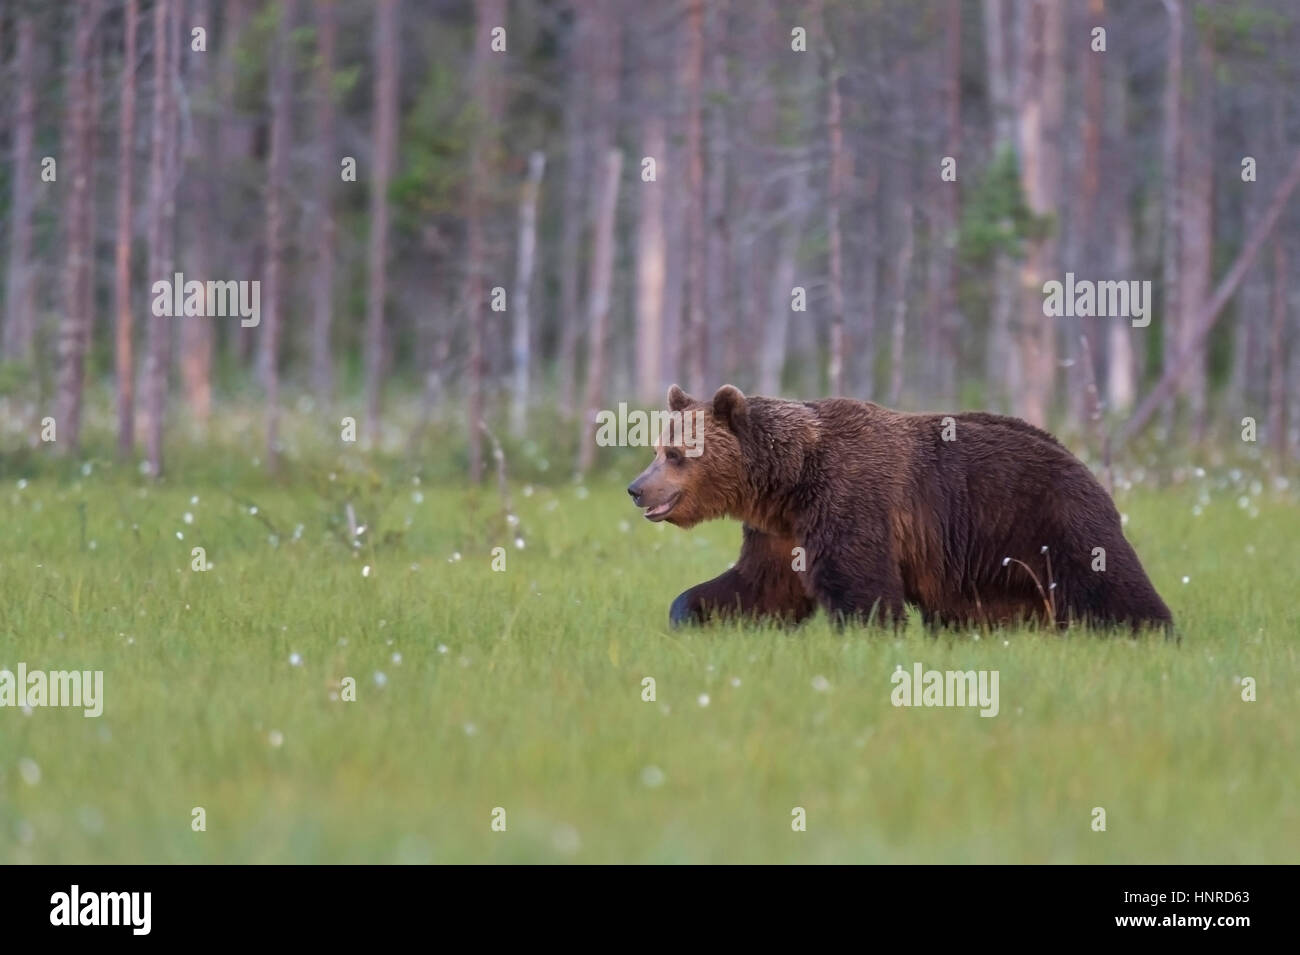 Brown bear at the edge of the forest, Braunbaer am Waldrand Stock Photo